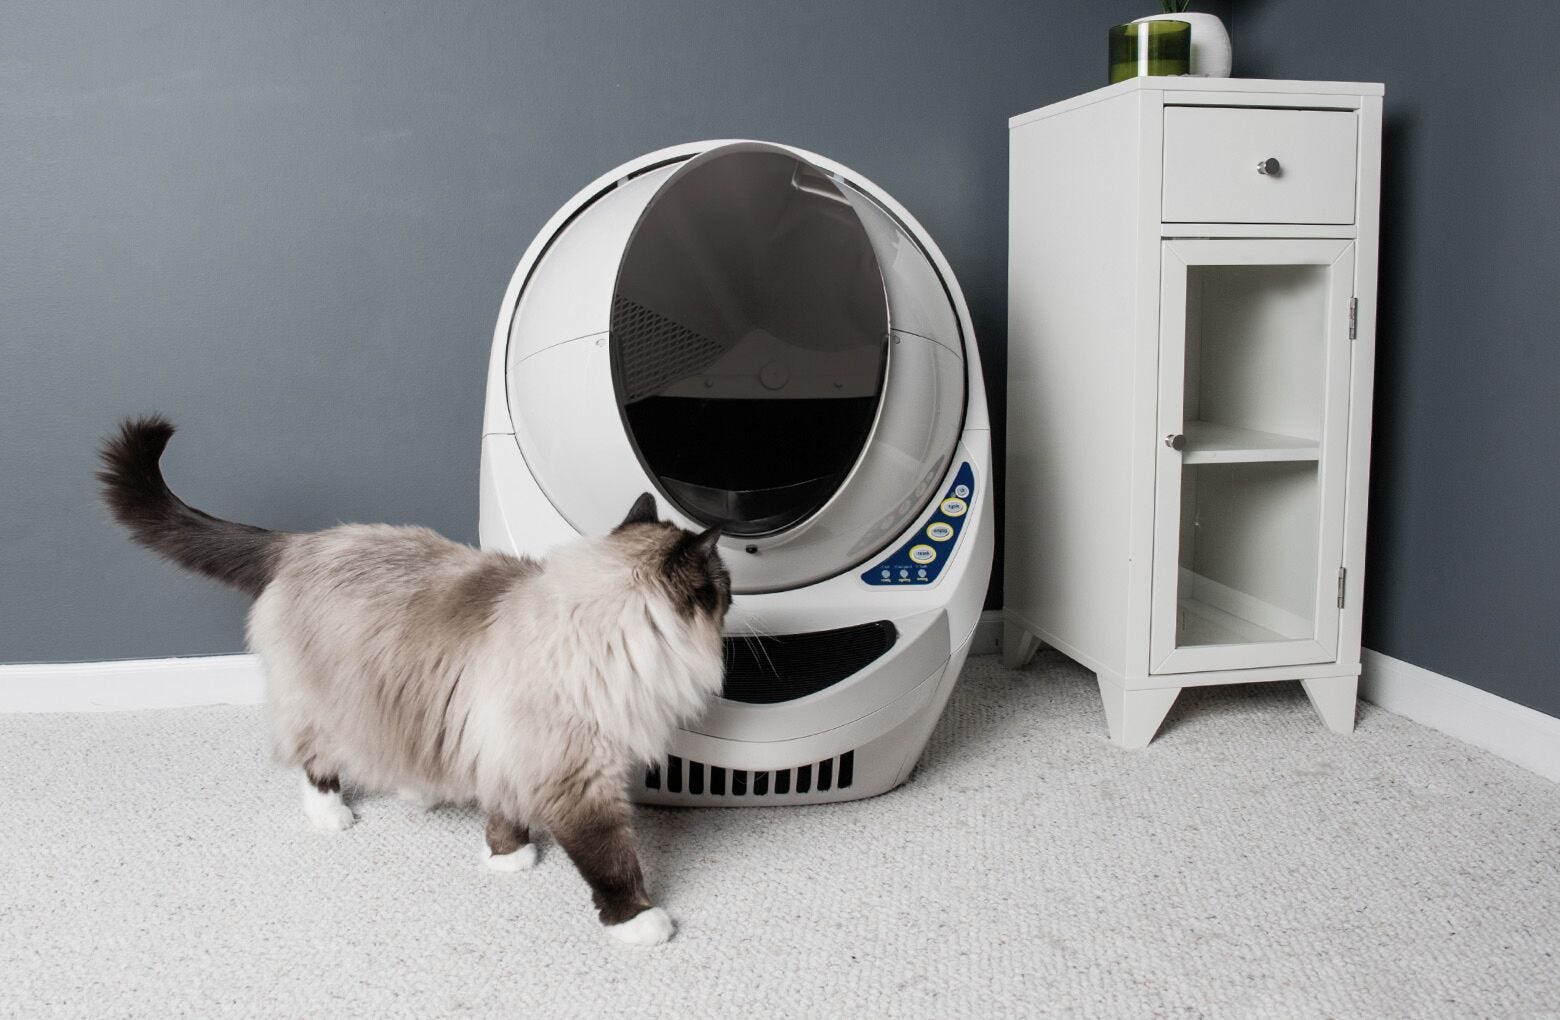 Custom Fit for Litter-Robot Beige Gentle Entry Into The Litter Box Helps Catch Tracked Litter for Senior Cats and Small Cats Litter-Robot Ramp